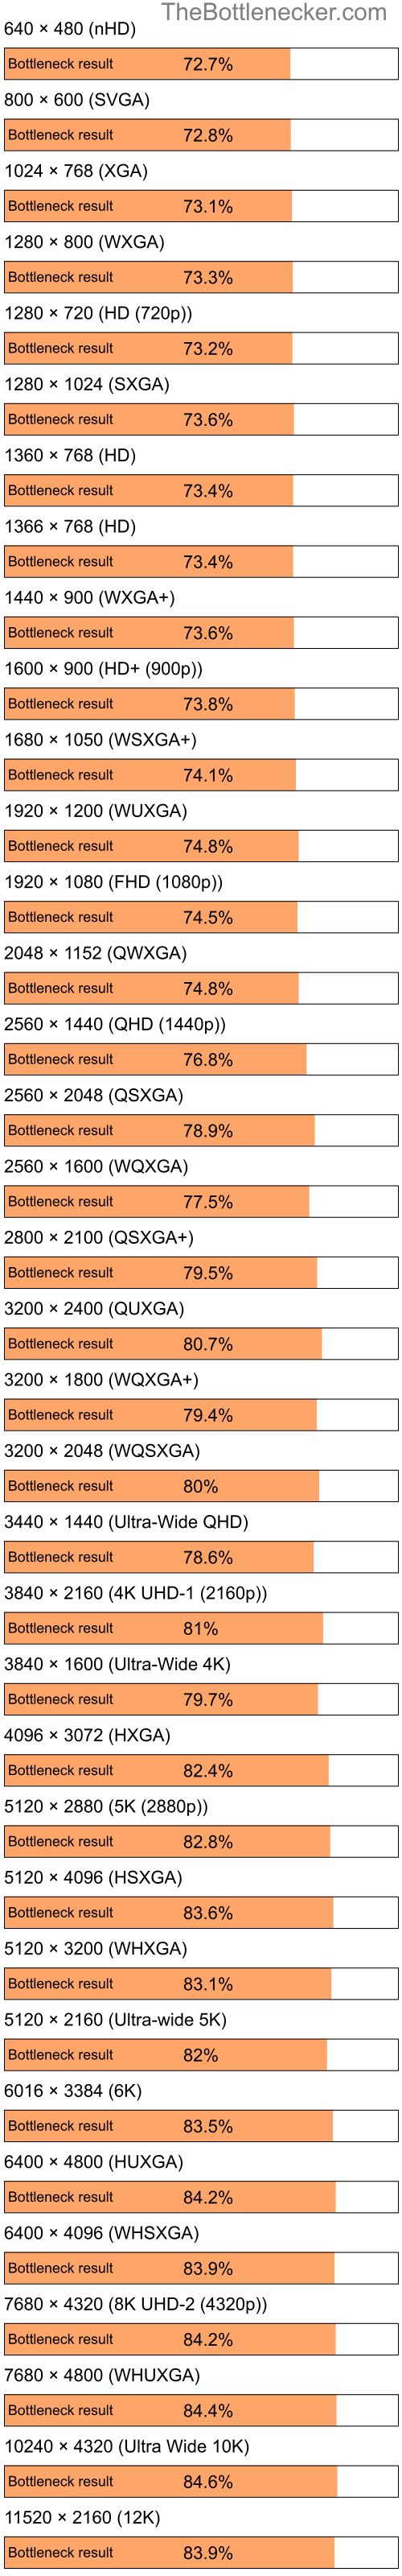 Bottleneck results by resolution for Intel Celeron and NVIDIA GeForce 8100 in Graphic Card Intense Tasks